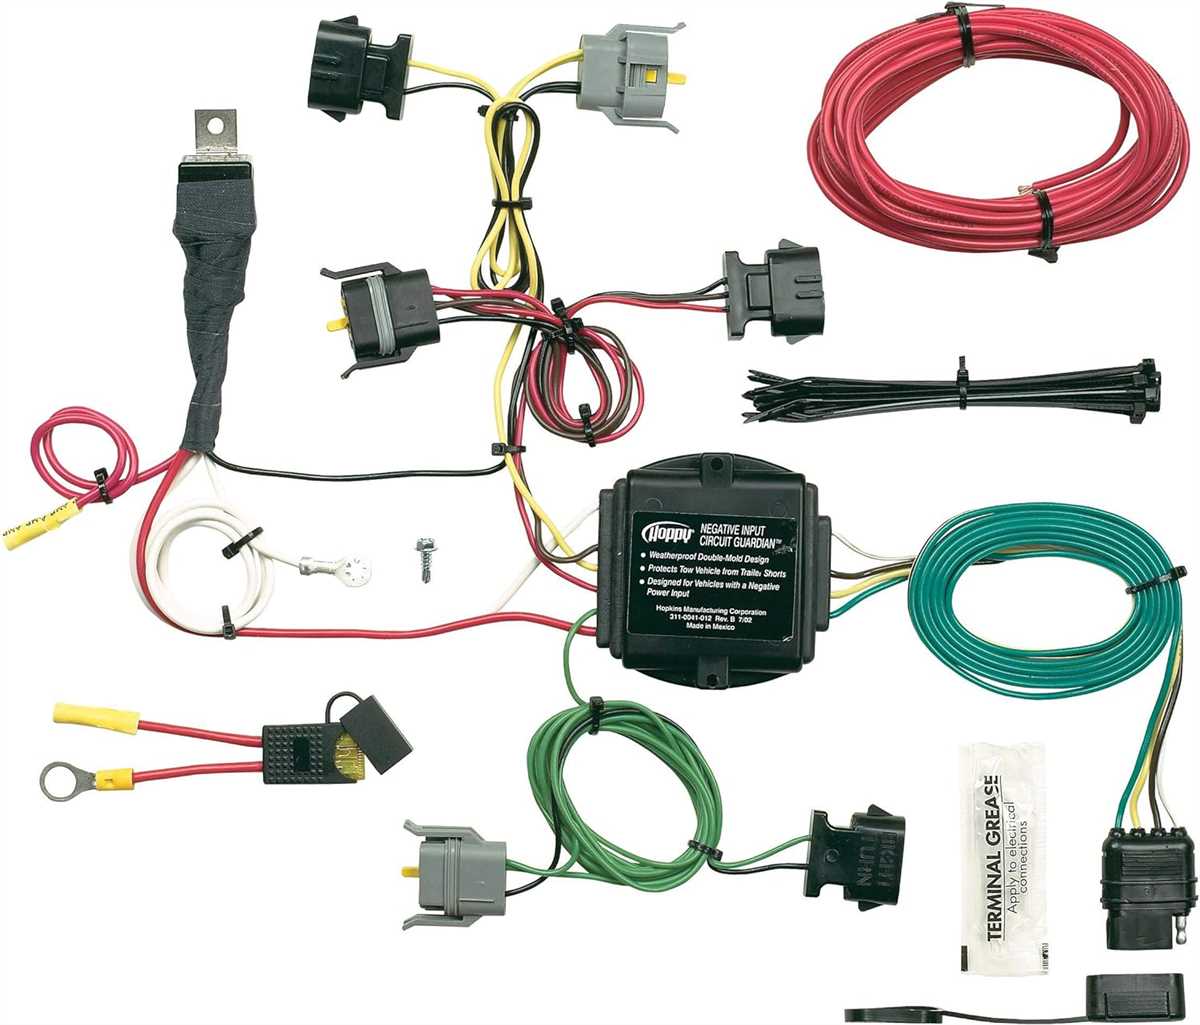 What is a Plug-in Simple Wiring Kit?